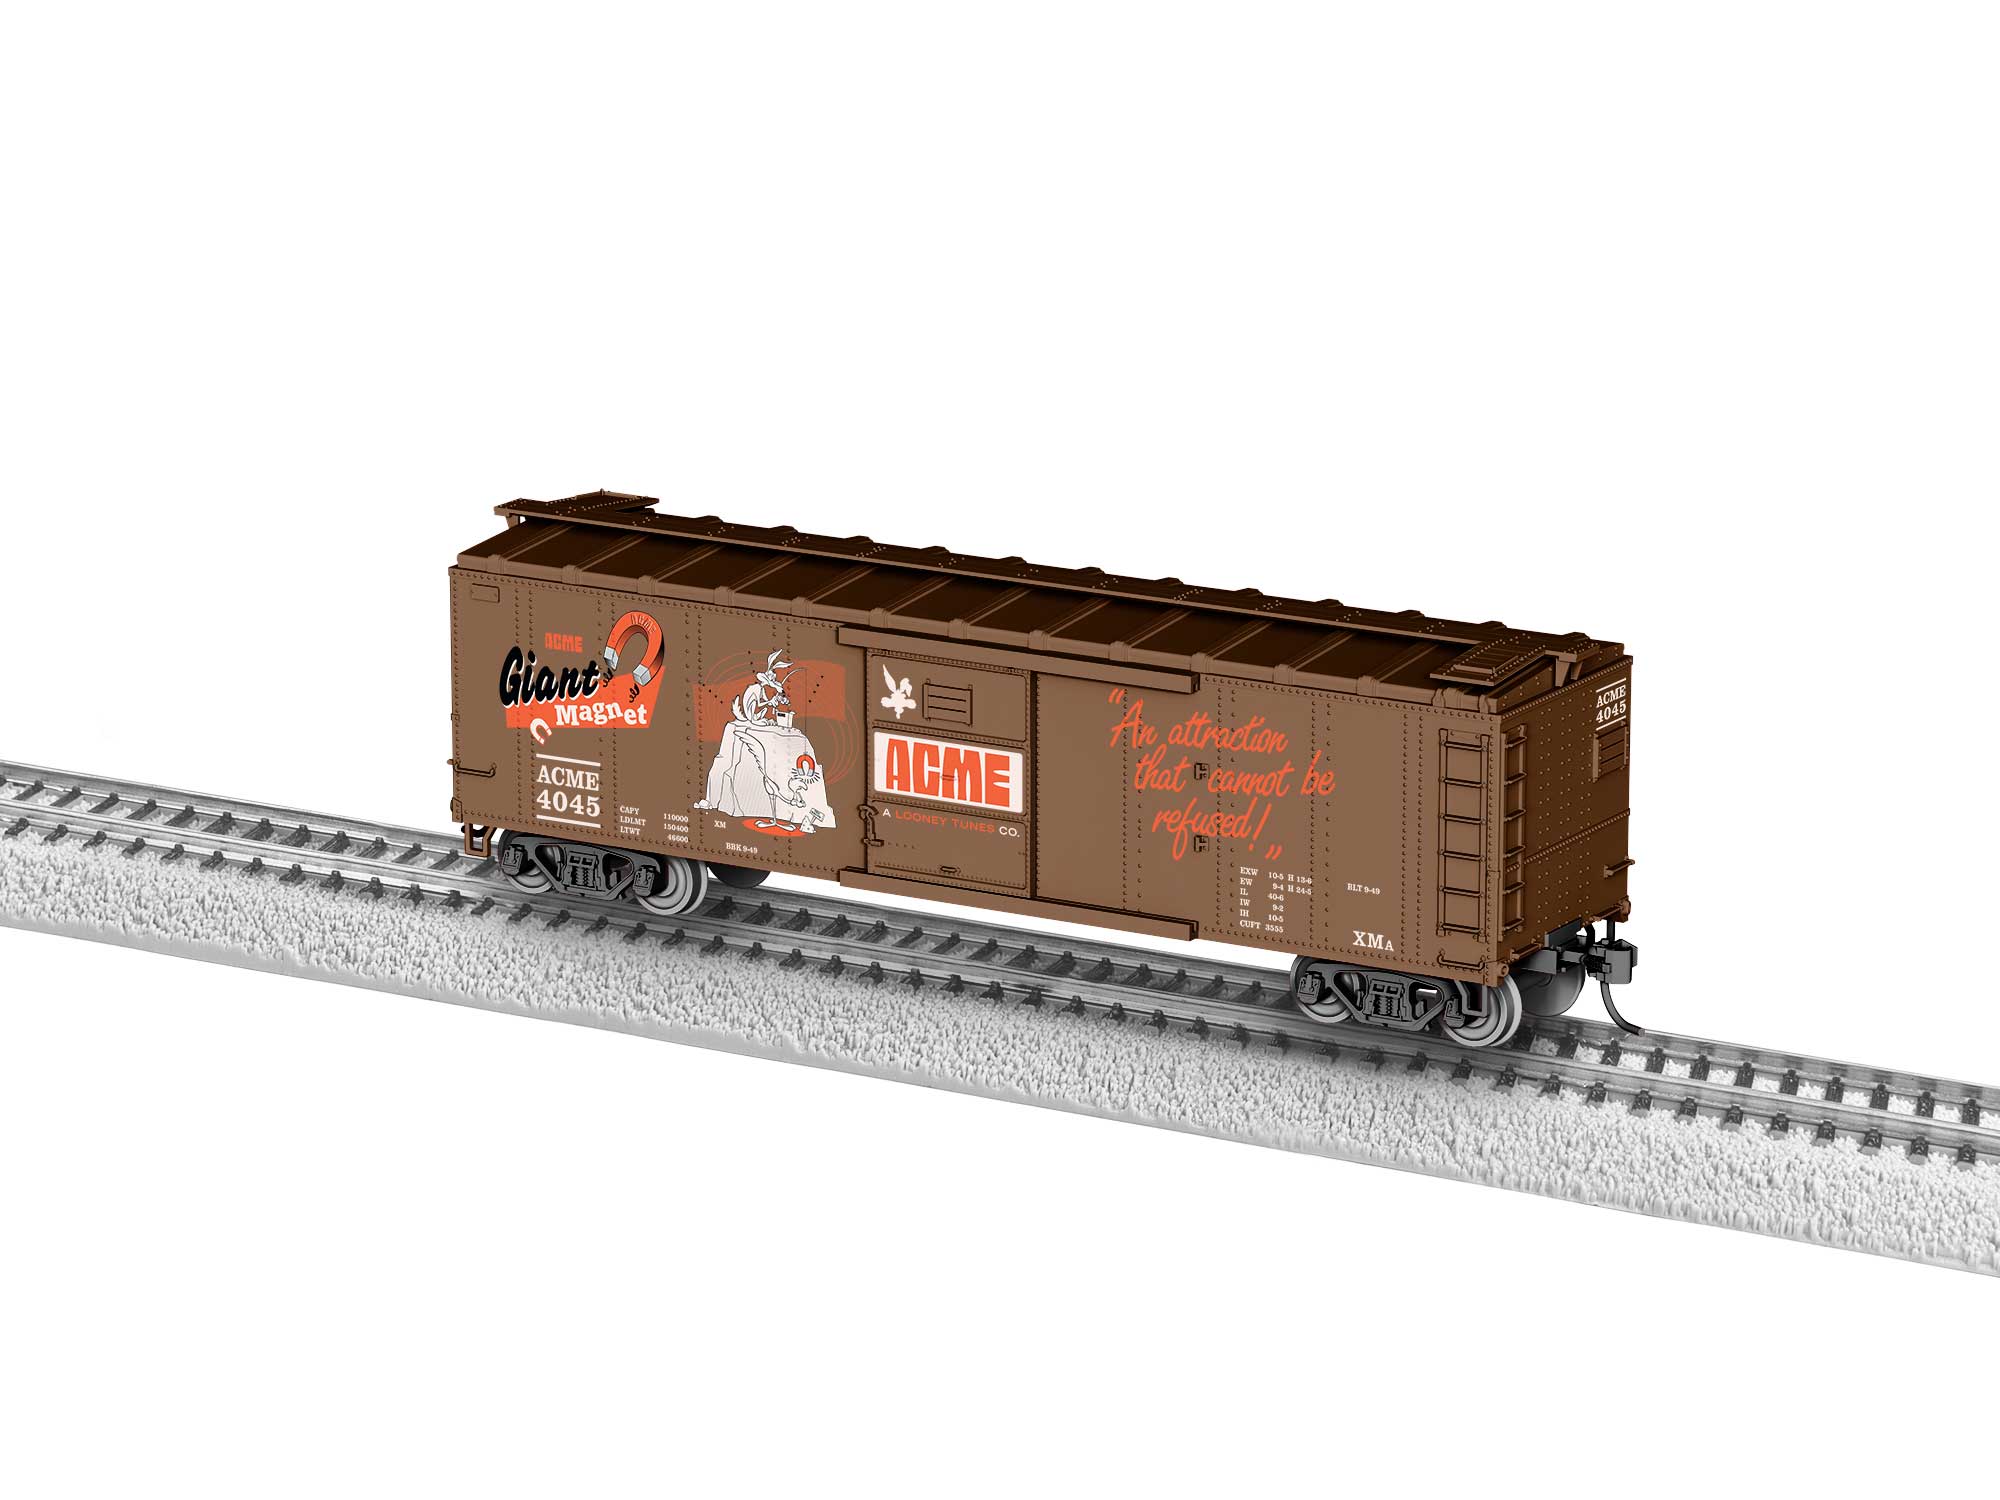 Lionel HO 2454240 - Looney Tunes - Boxcar "ACME" #4045 (Giant Magnet)